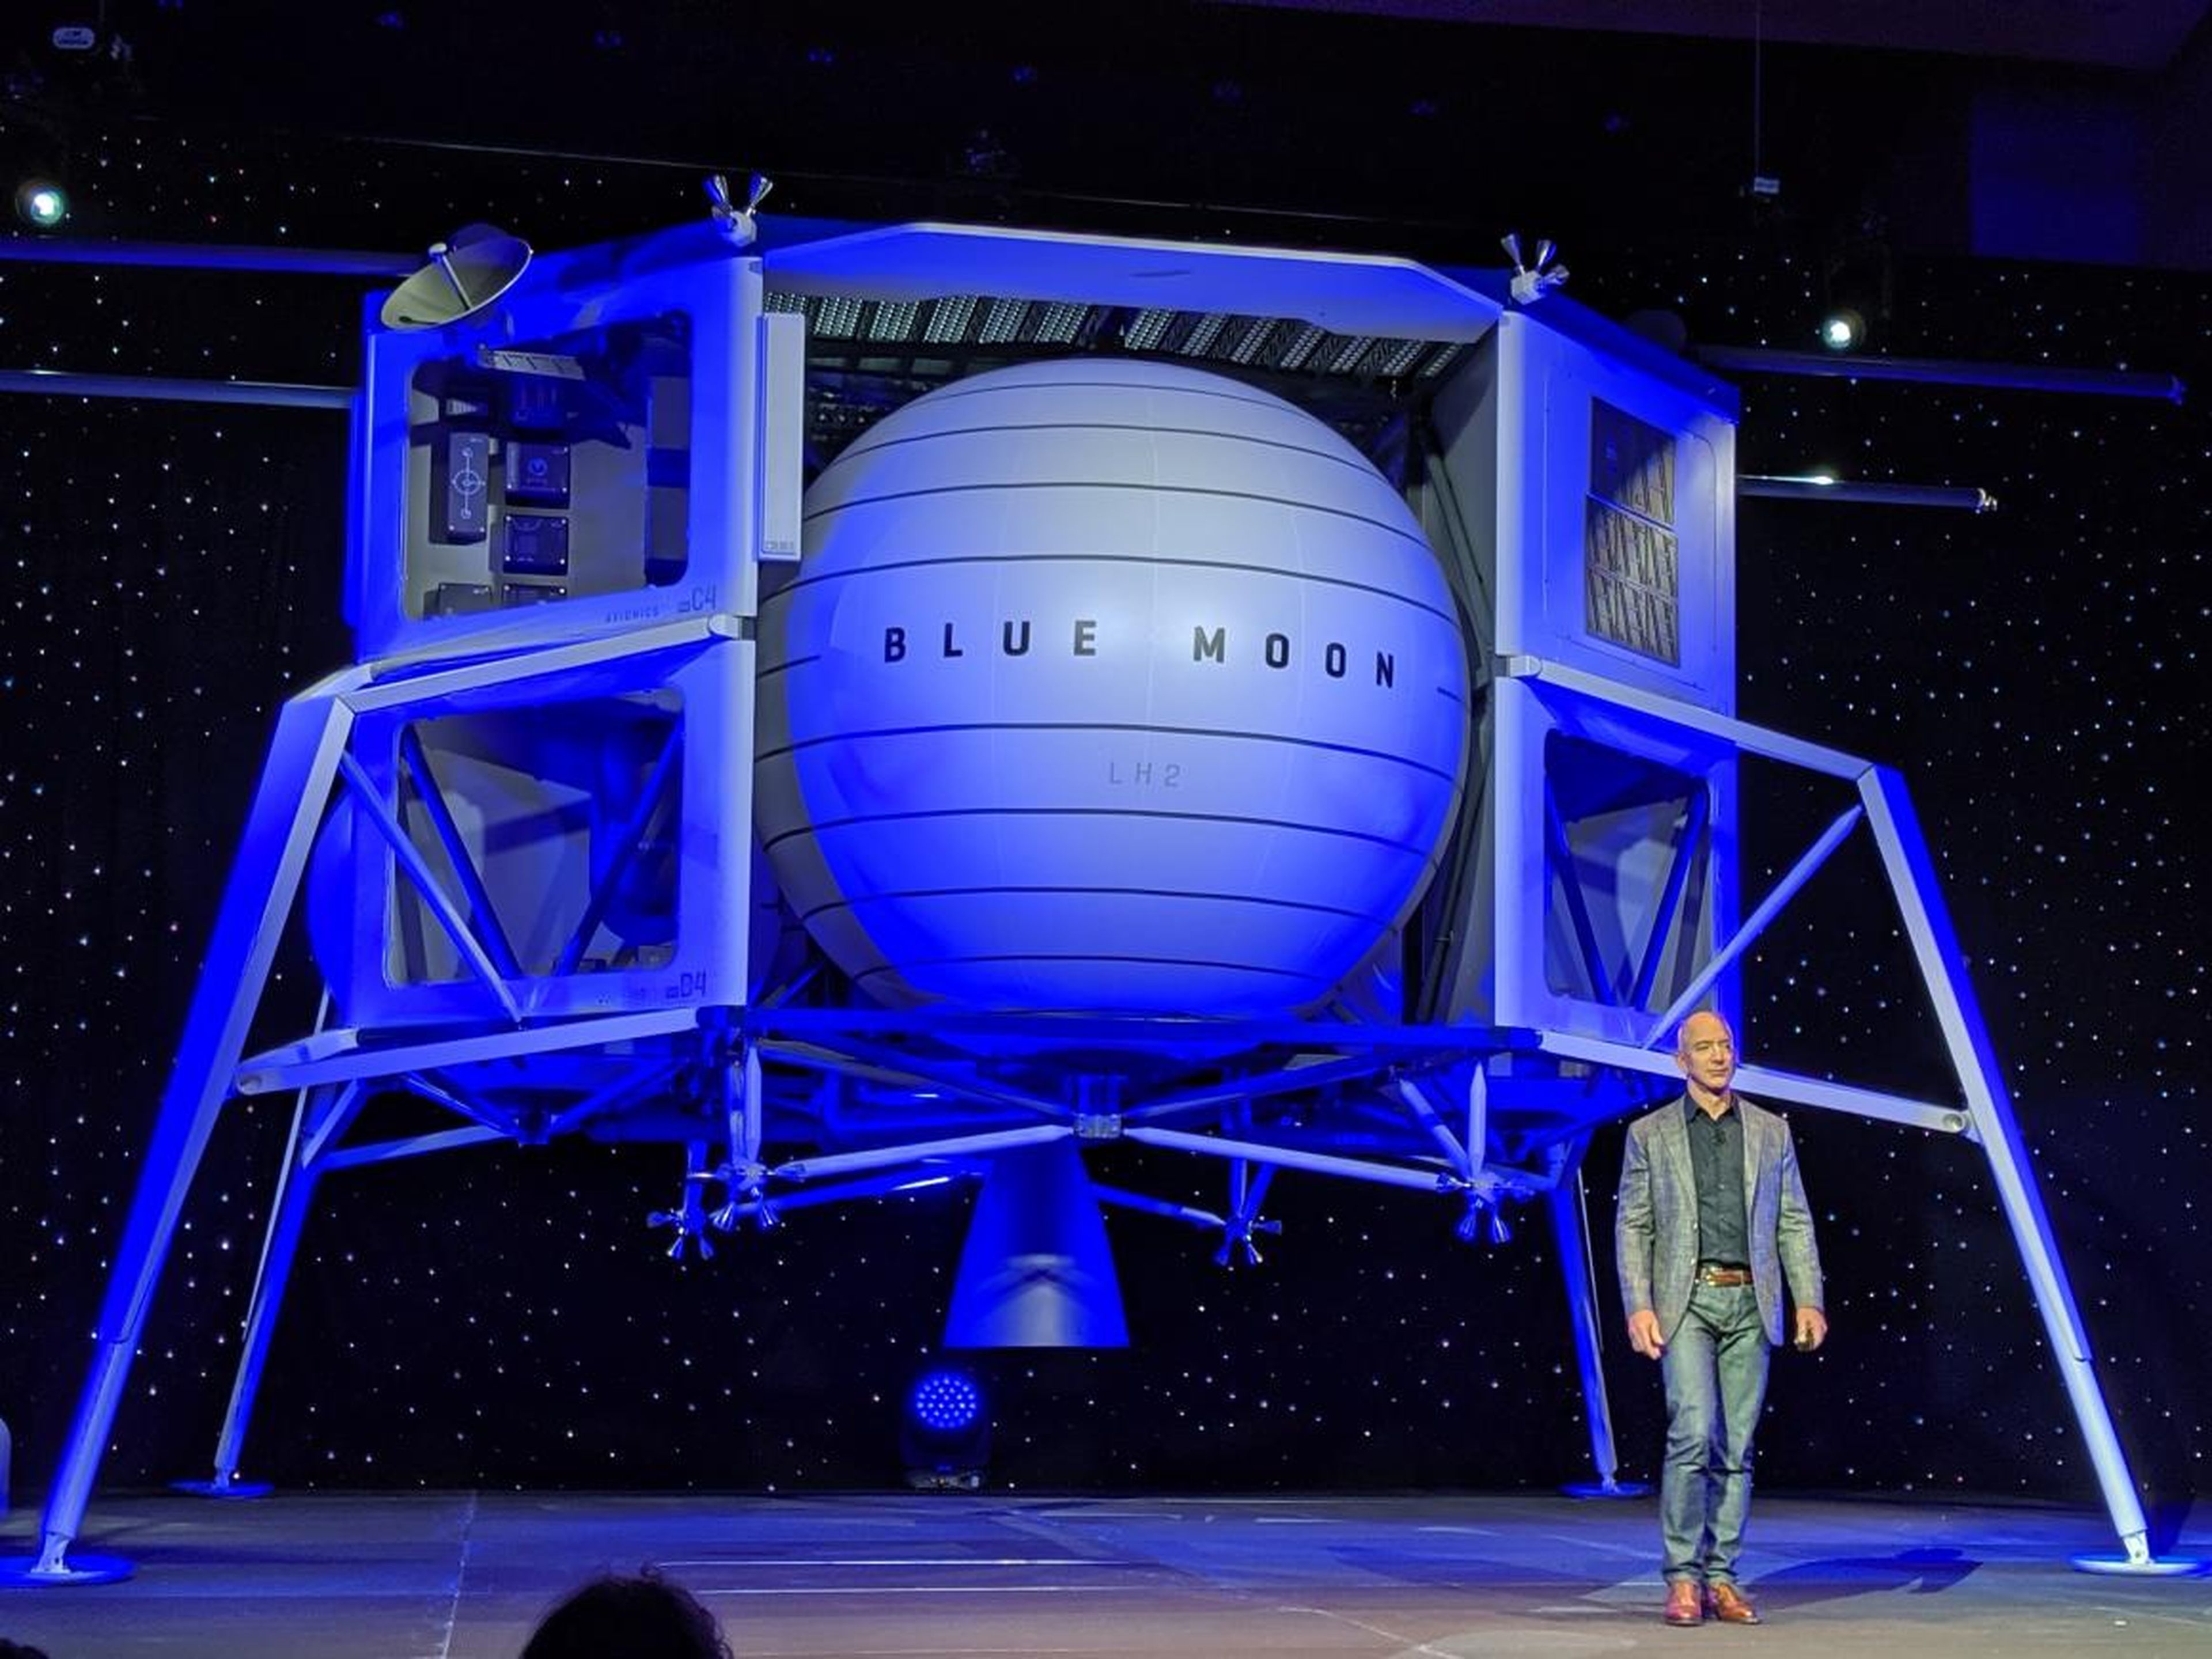 Bezos added that Blue Origin has a three-year head-start on a lunar lander and could meet NASA's desire to send astronauts back to the moon by 2024.